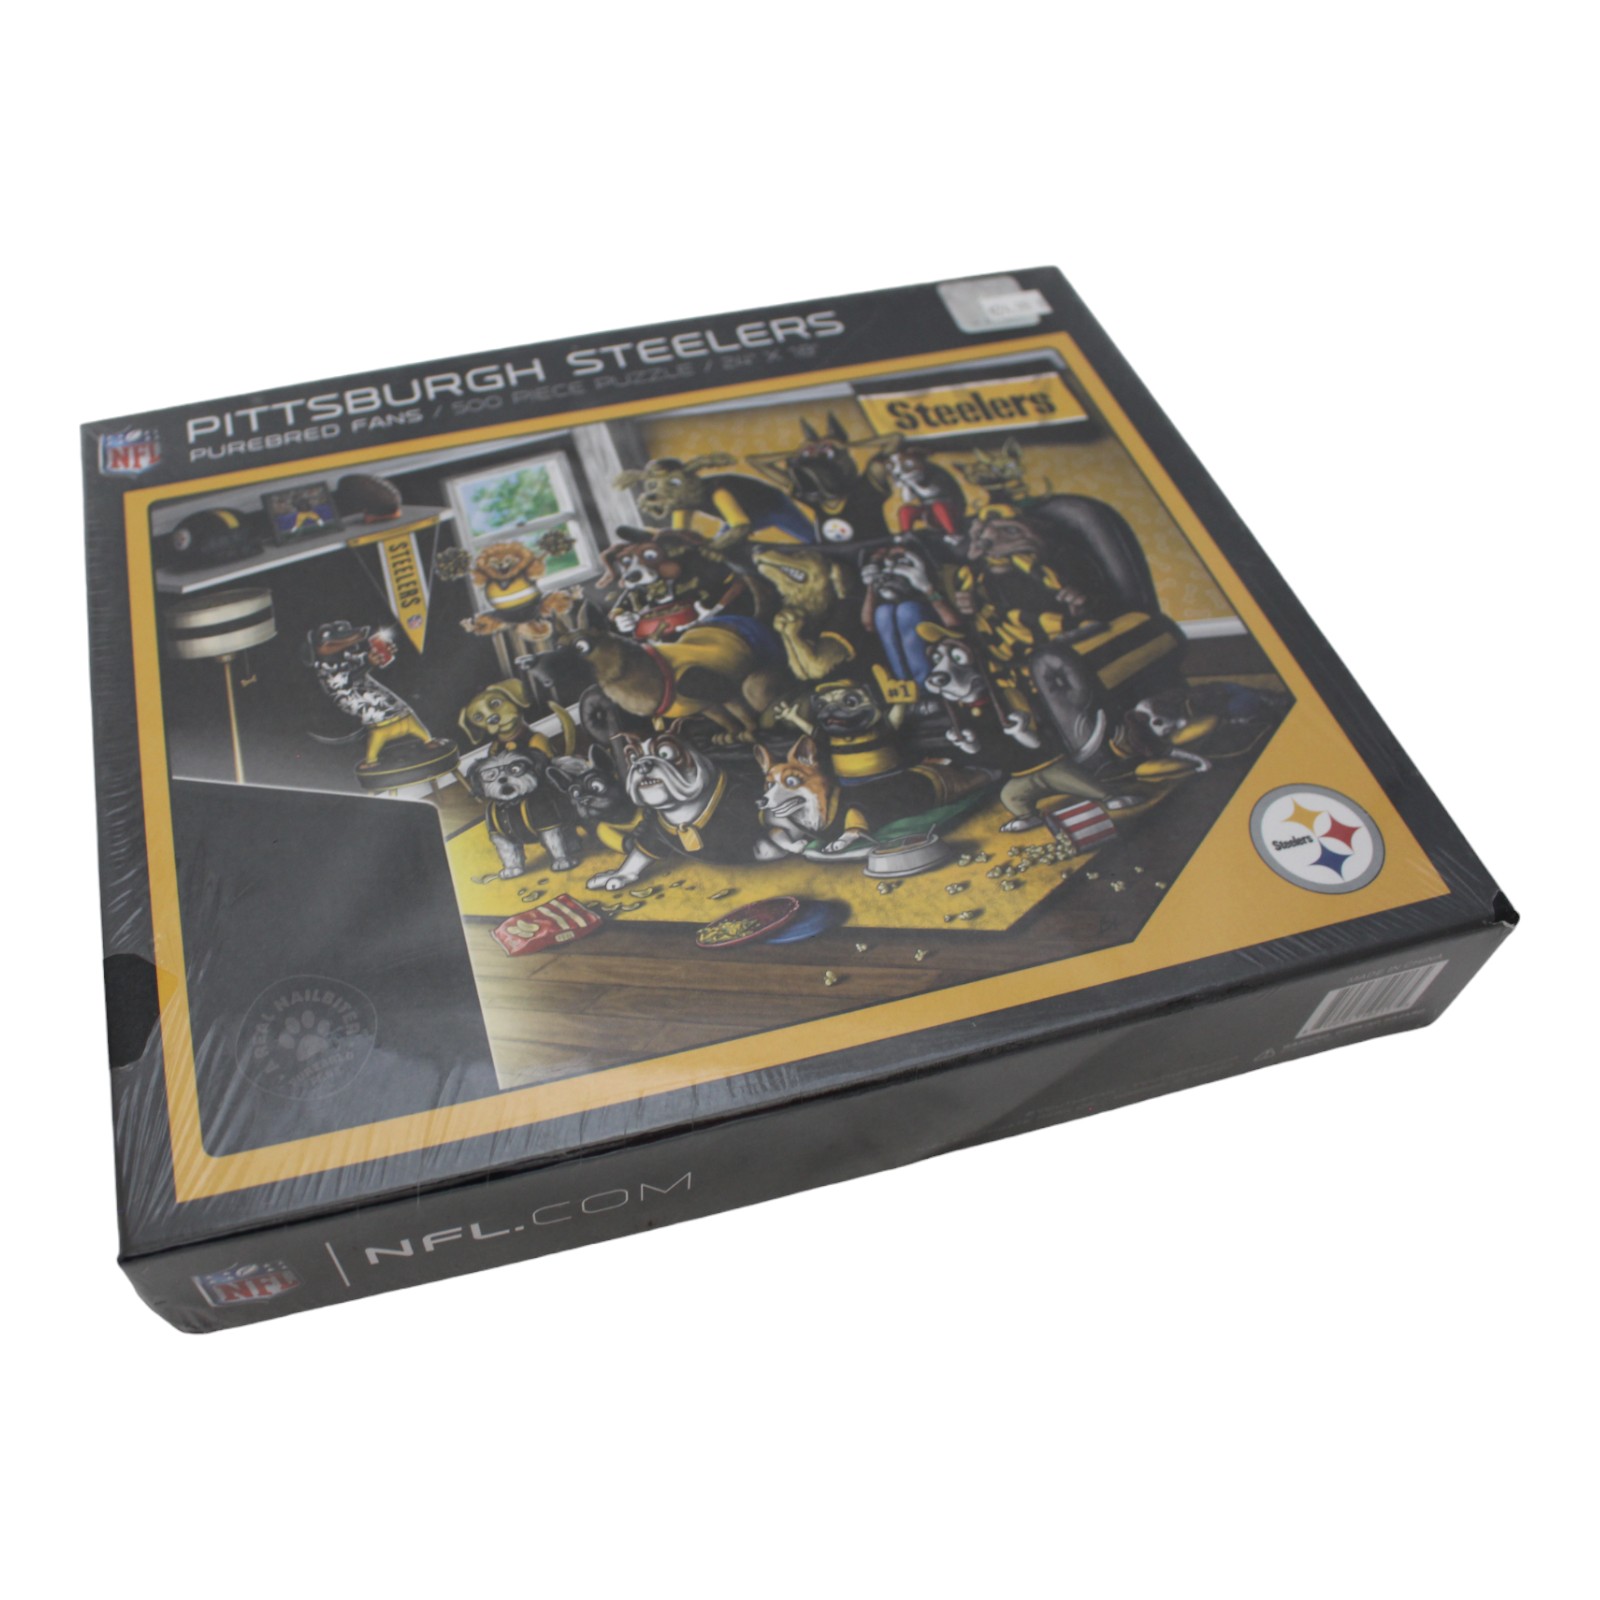 Pittsburgh Steelers 18"x24" YouTheFan 500 Piece Purebread Puzzle